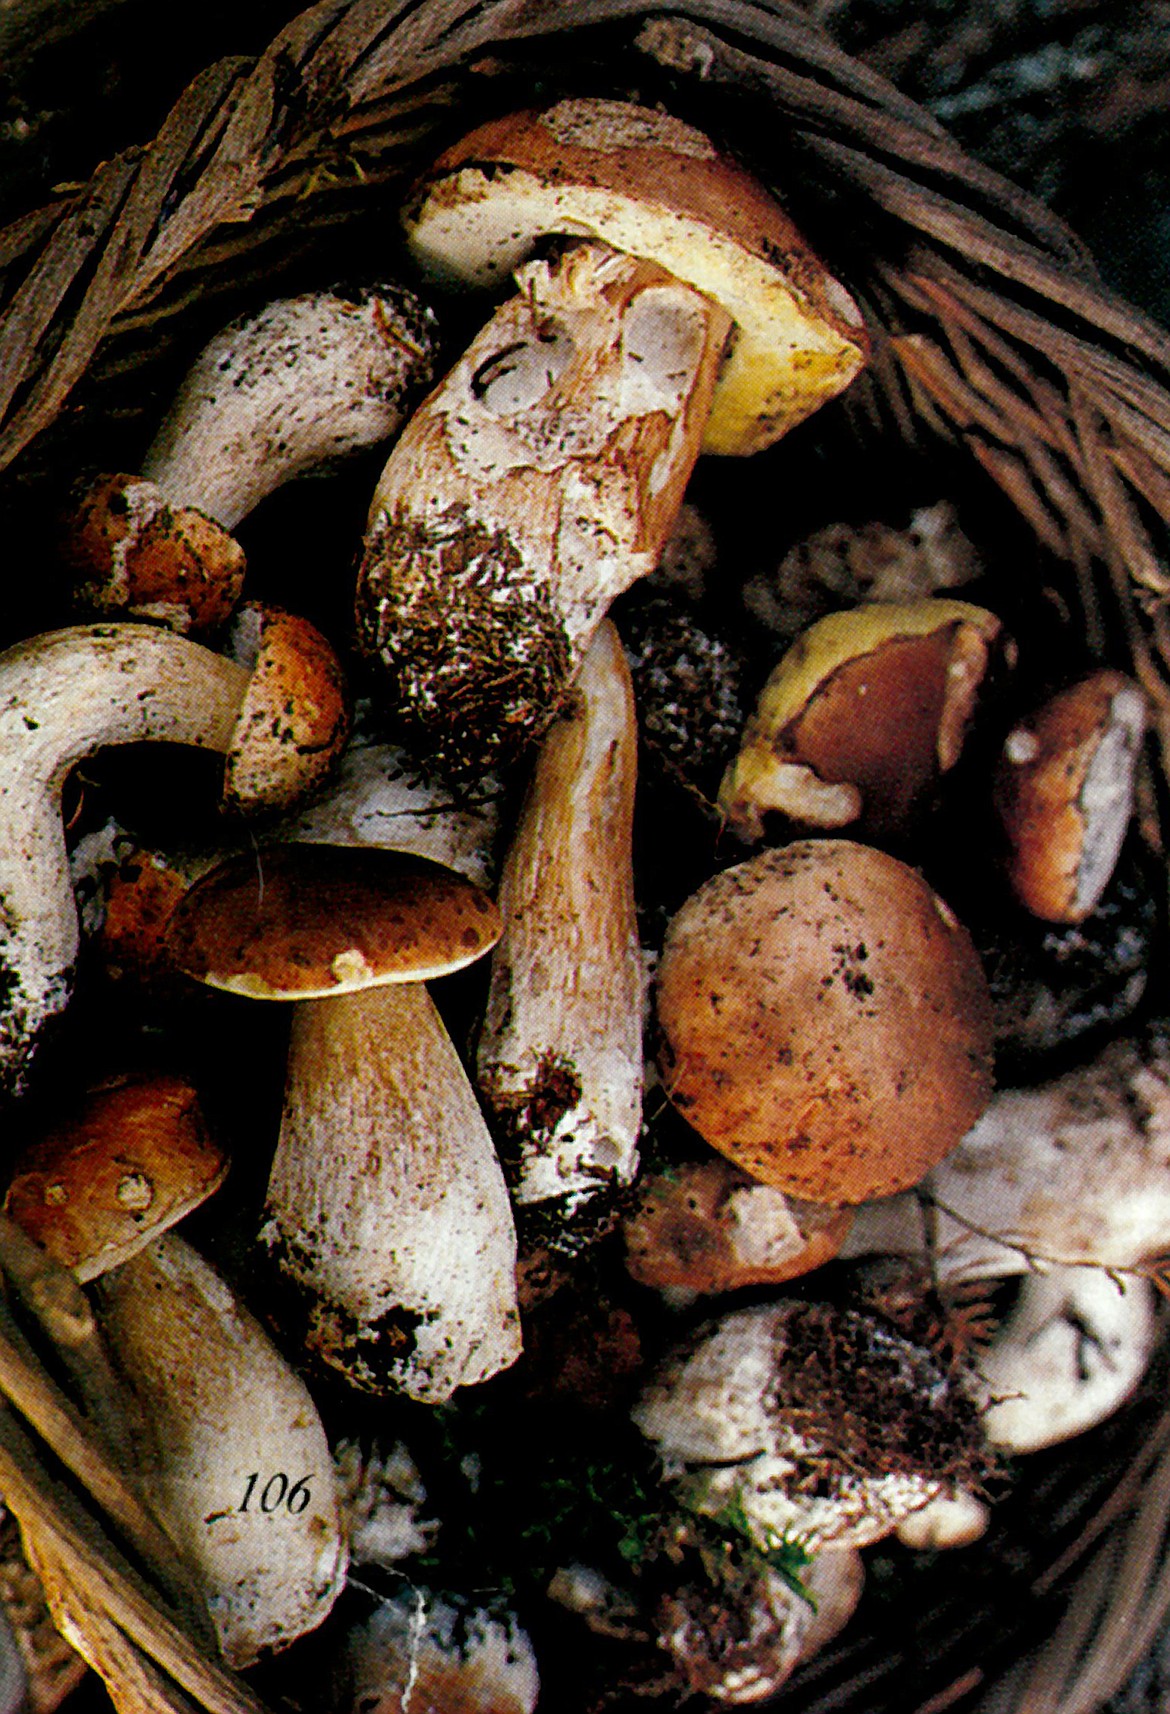 A basket of boletes promises a savory supper.